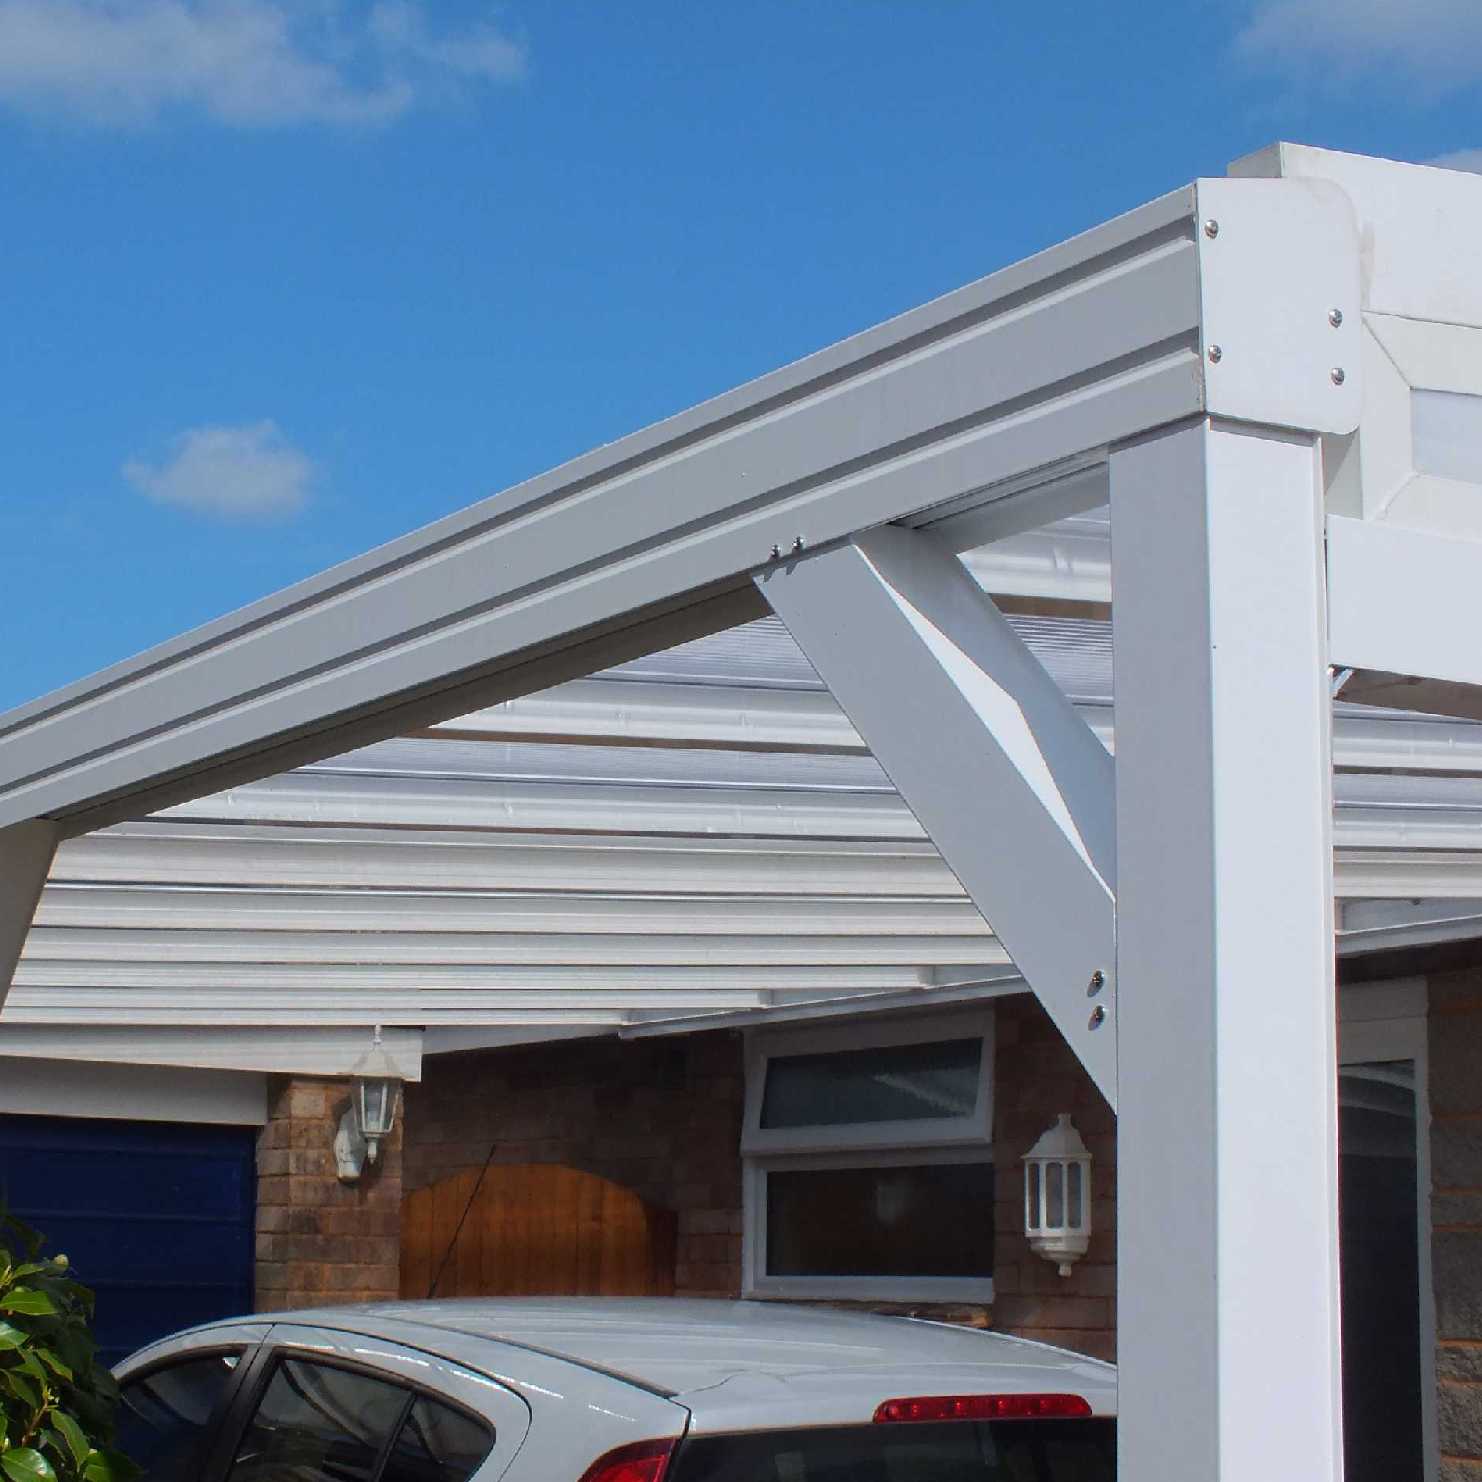 Great deals on Omega Smart Lean-To Canopy, White with 16mm Polycarbonate Glazing - 10.6m (W) x 2.5m (P), (5) Supporting Posts